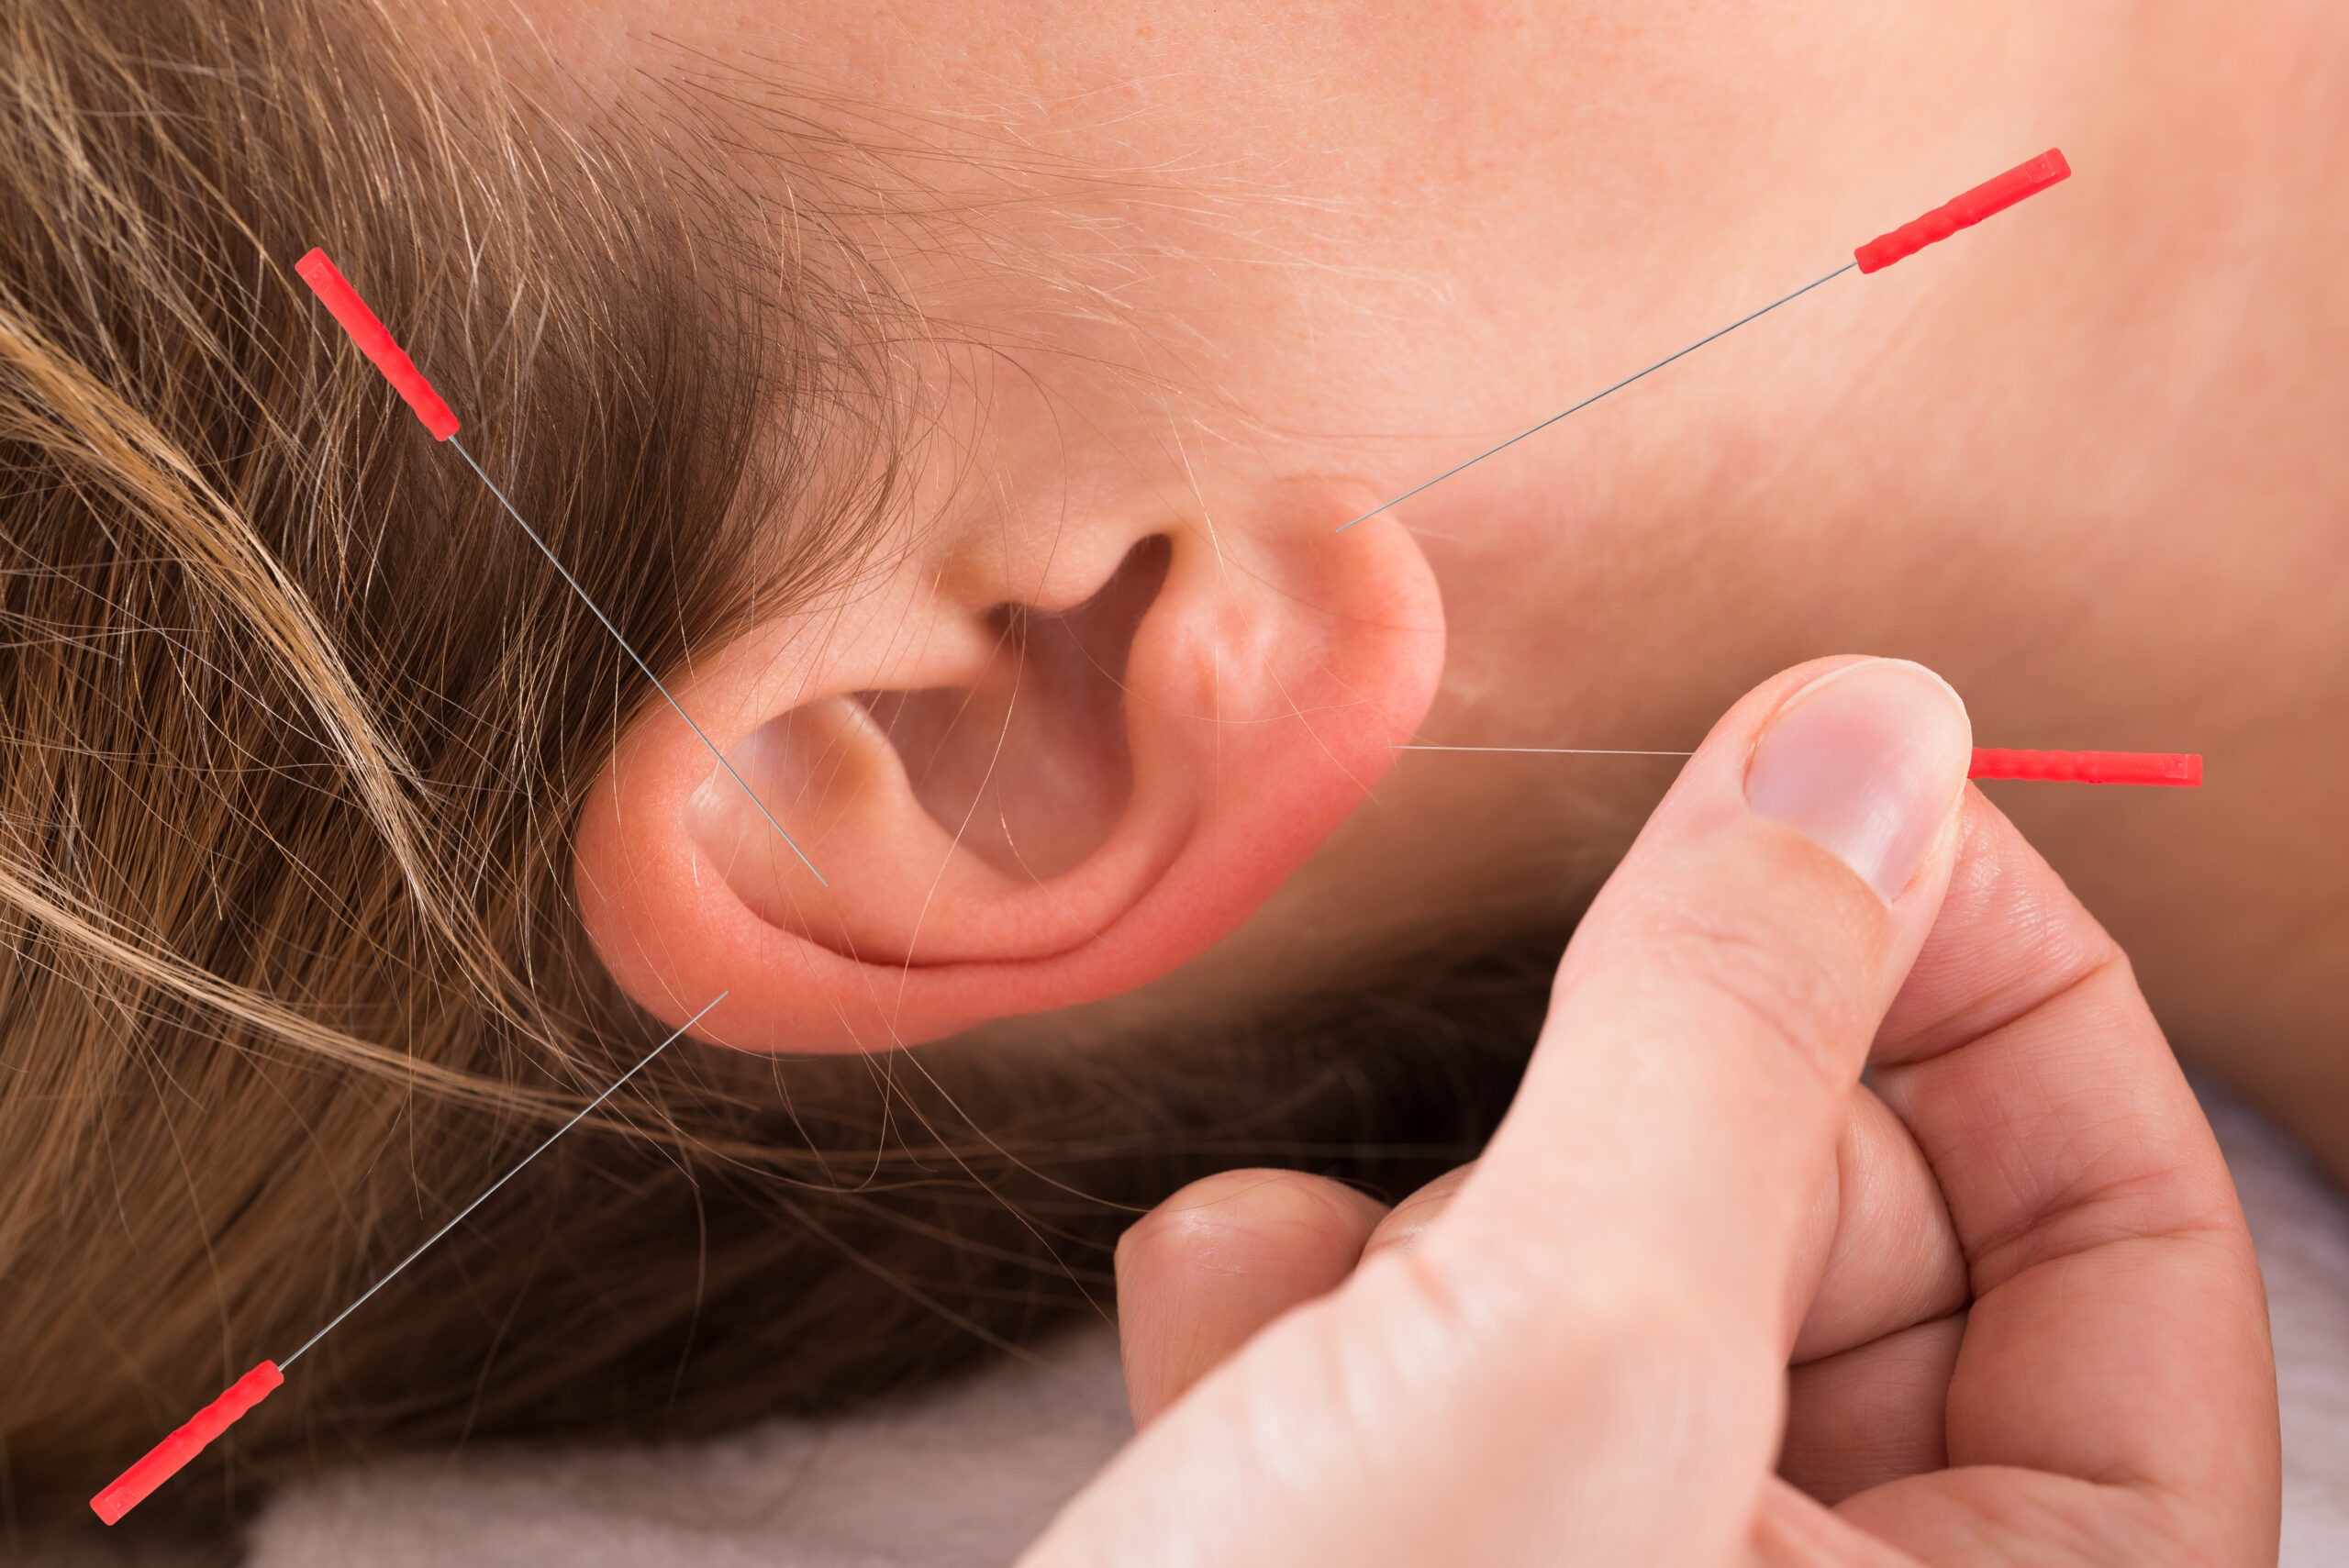 Closeup of hand performing acupuncture therapy on auricle at salon